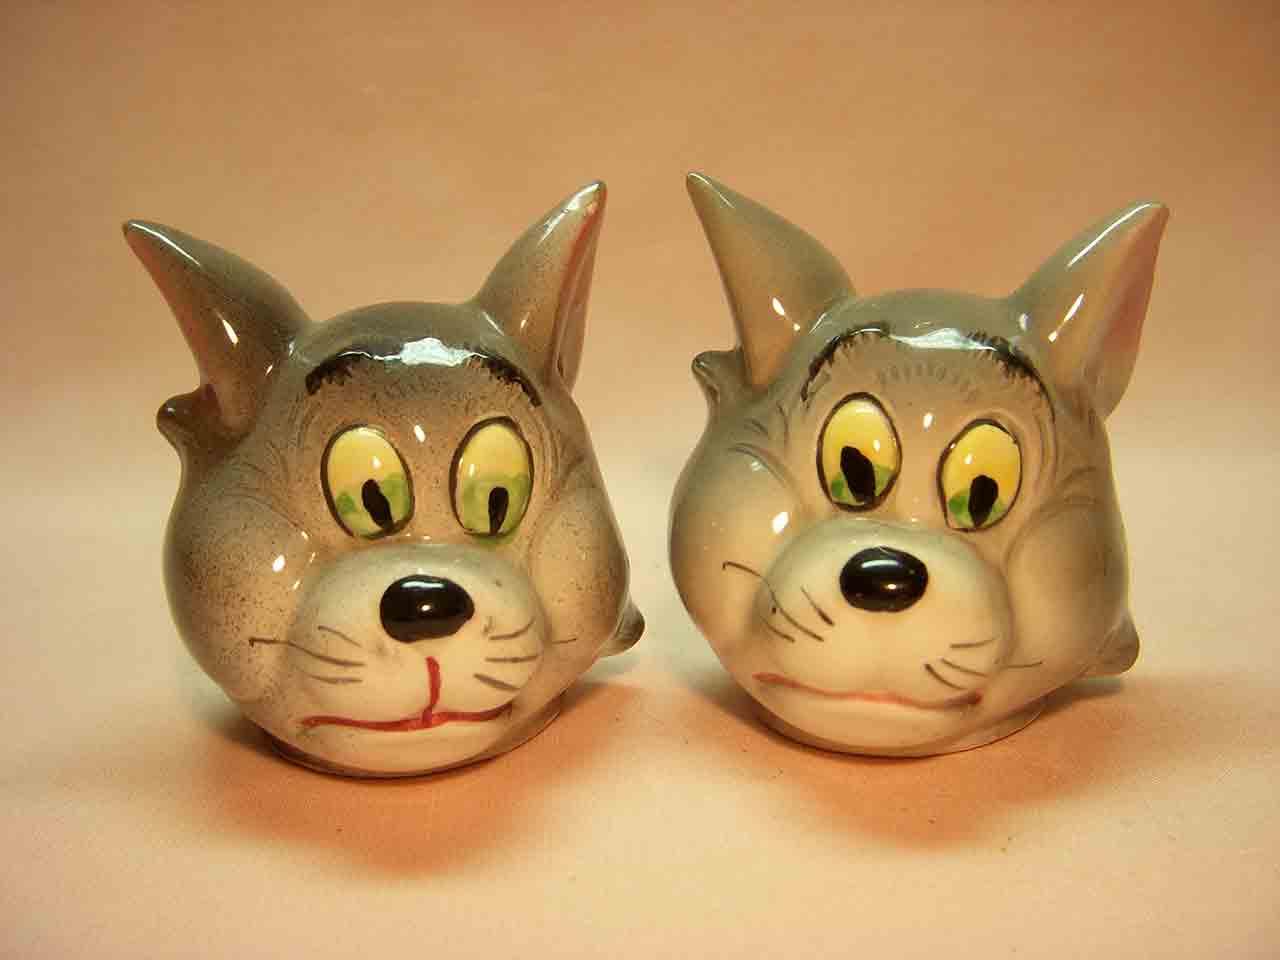 Characters from MGM Studios salt and pepper shakers - Tom